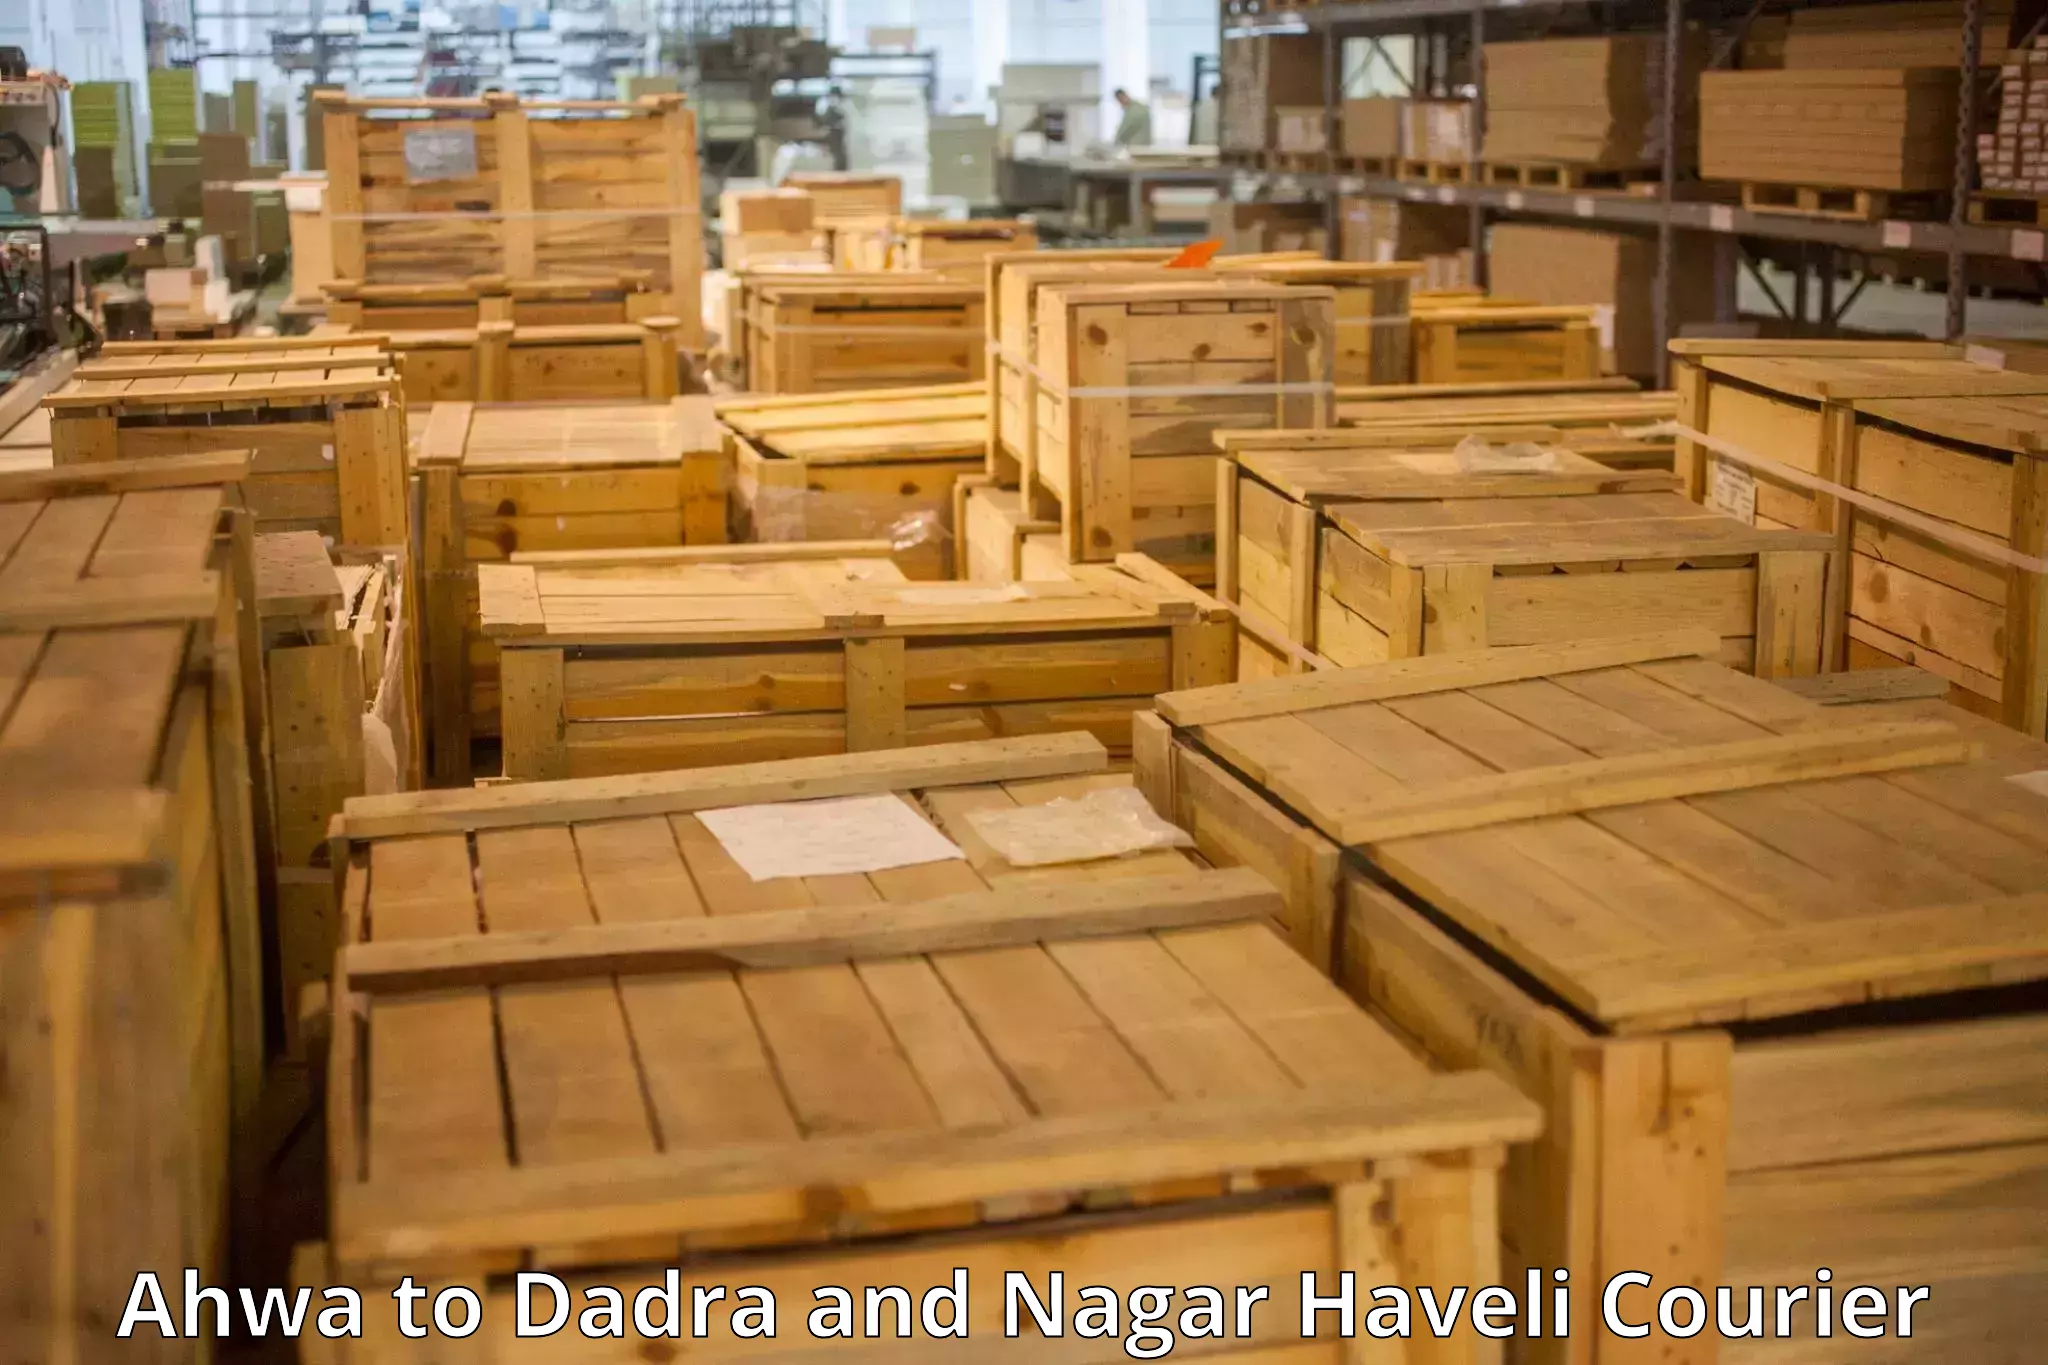 Baggage transport professionals in Ahwa to Dadra and Nagar Haveli